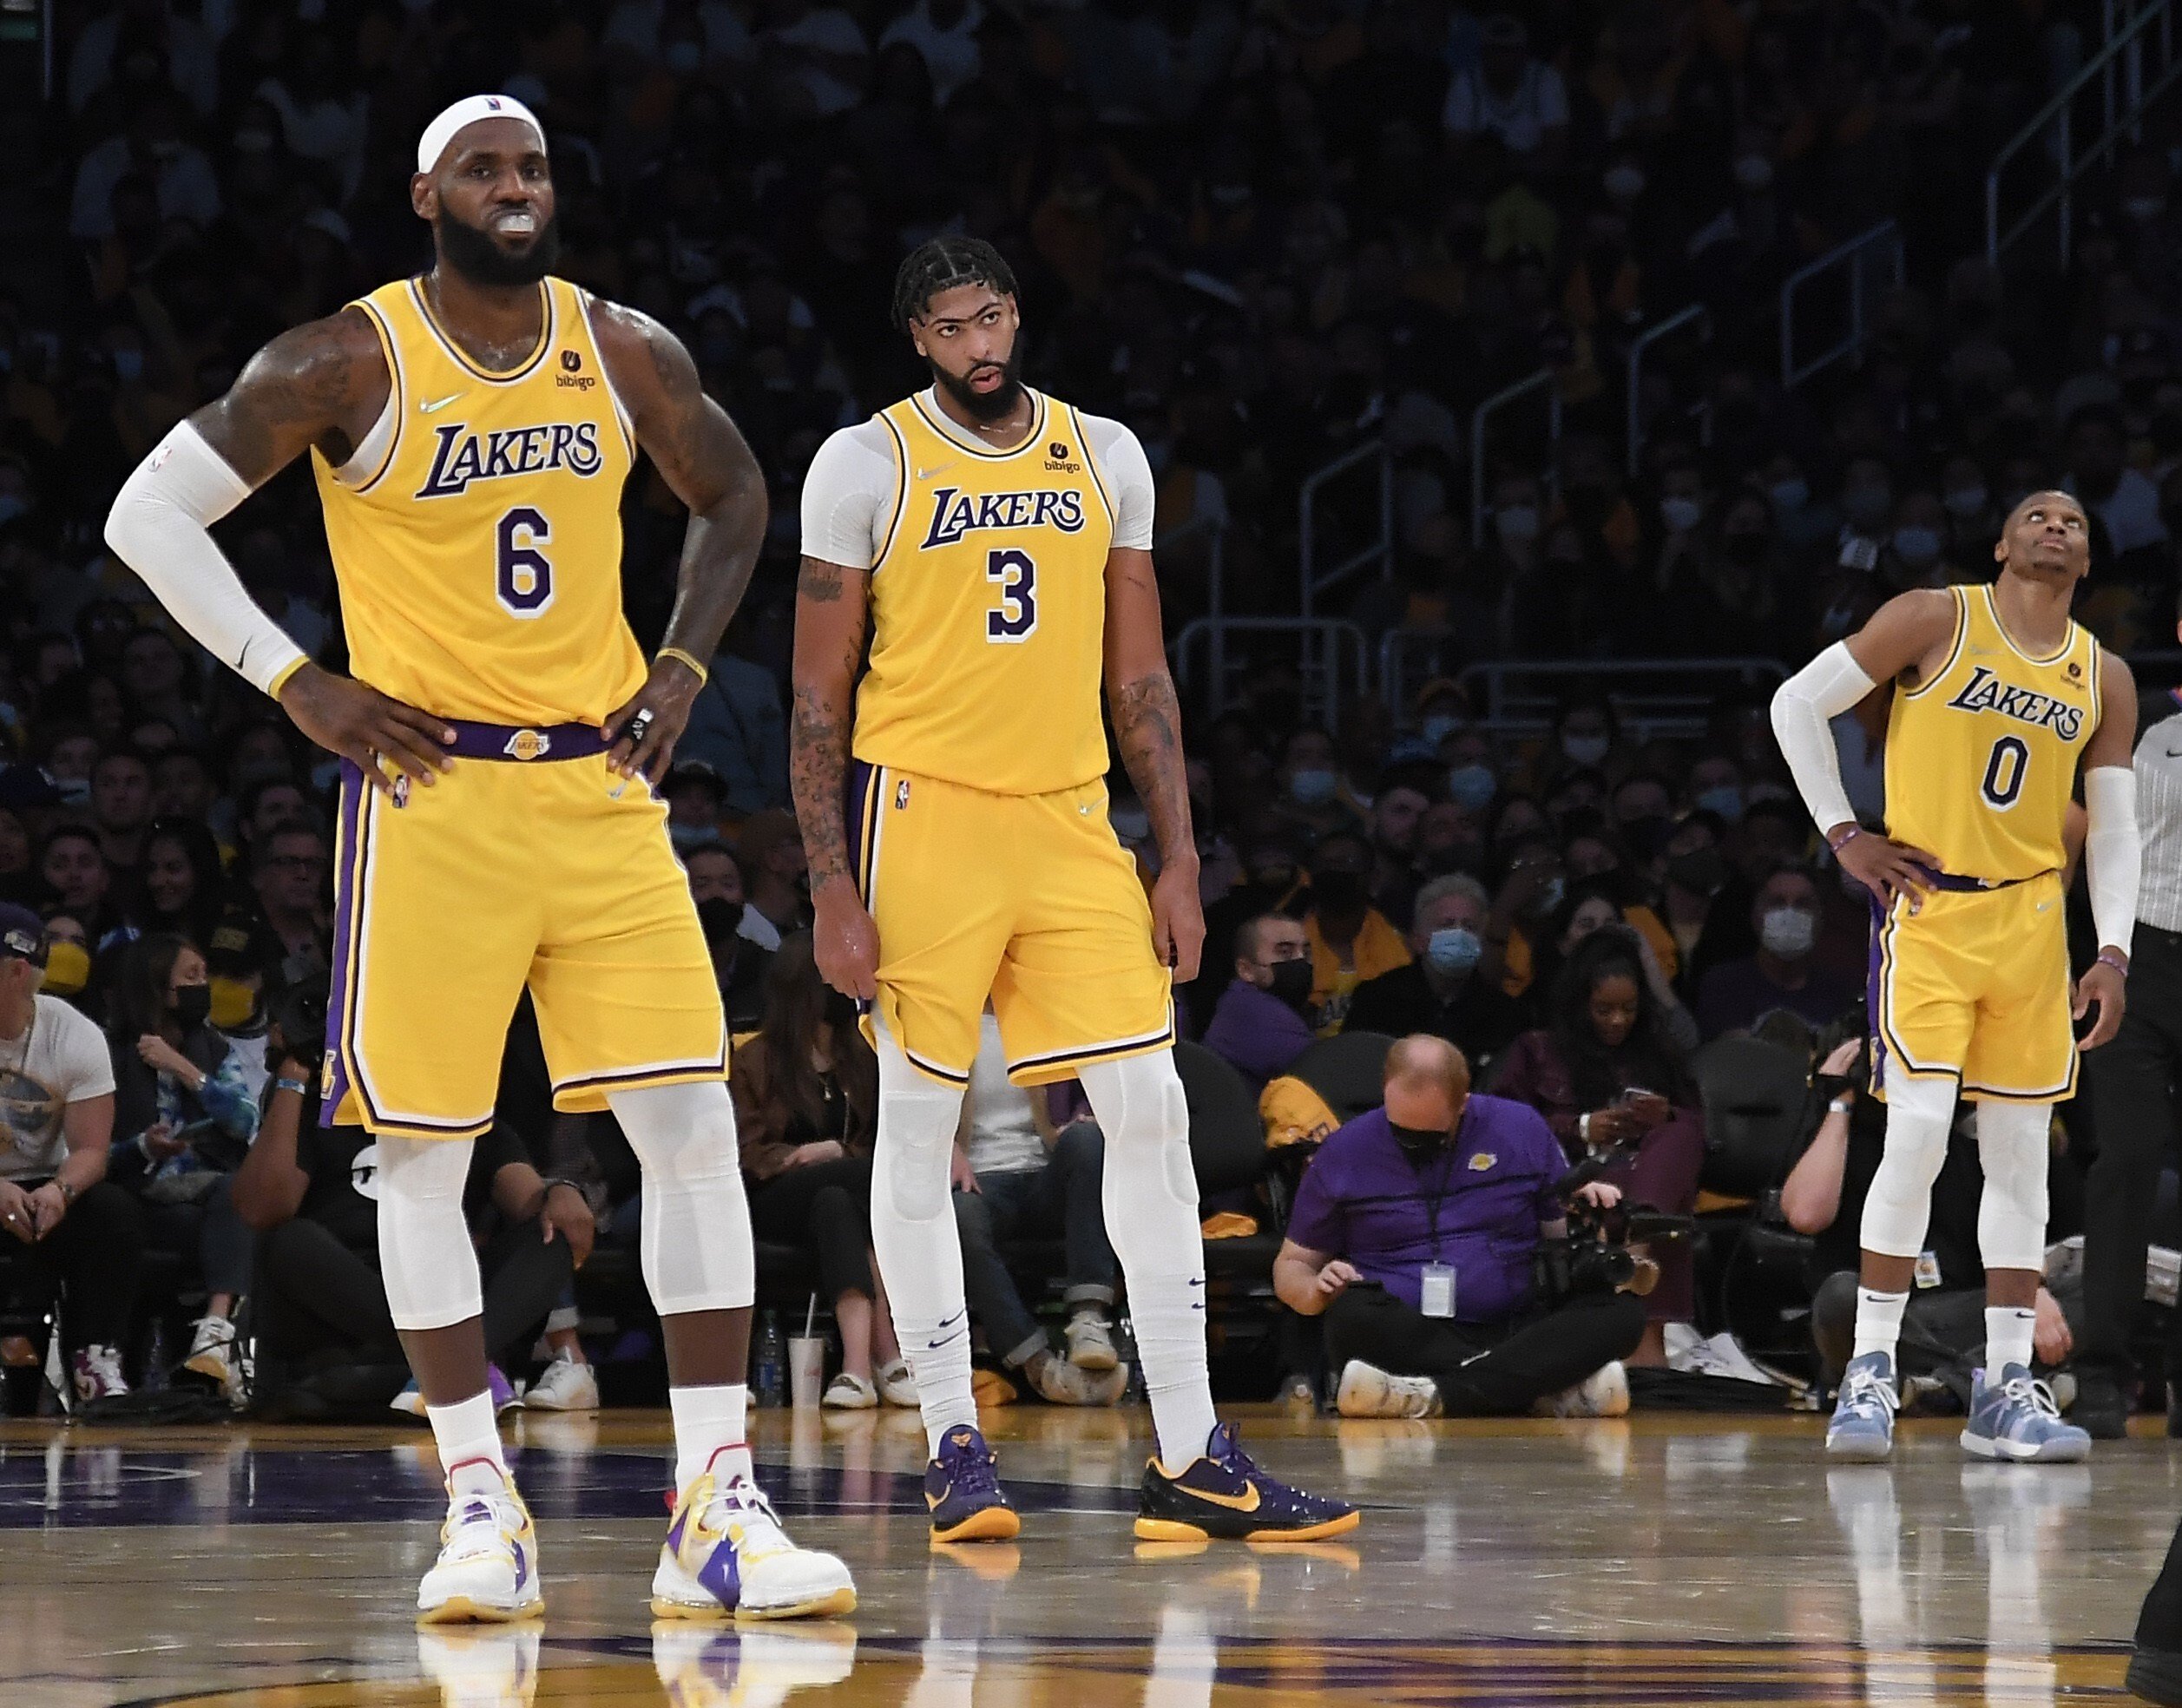 Lakers release schedule for 2021-22 season, have most national TV